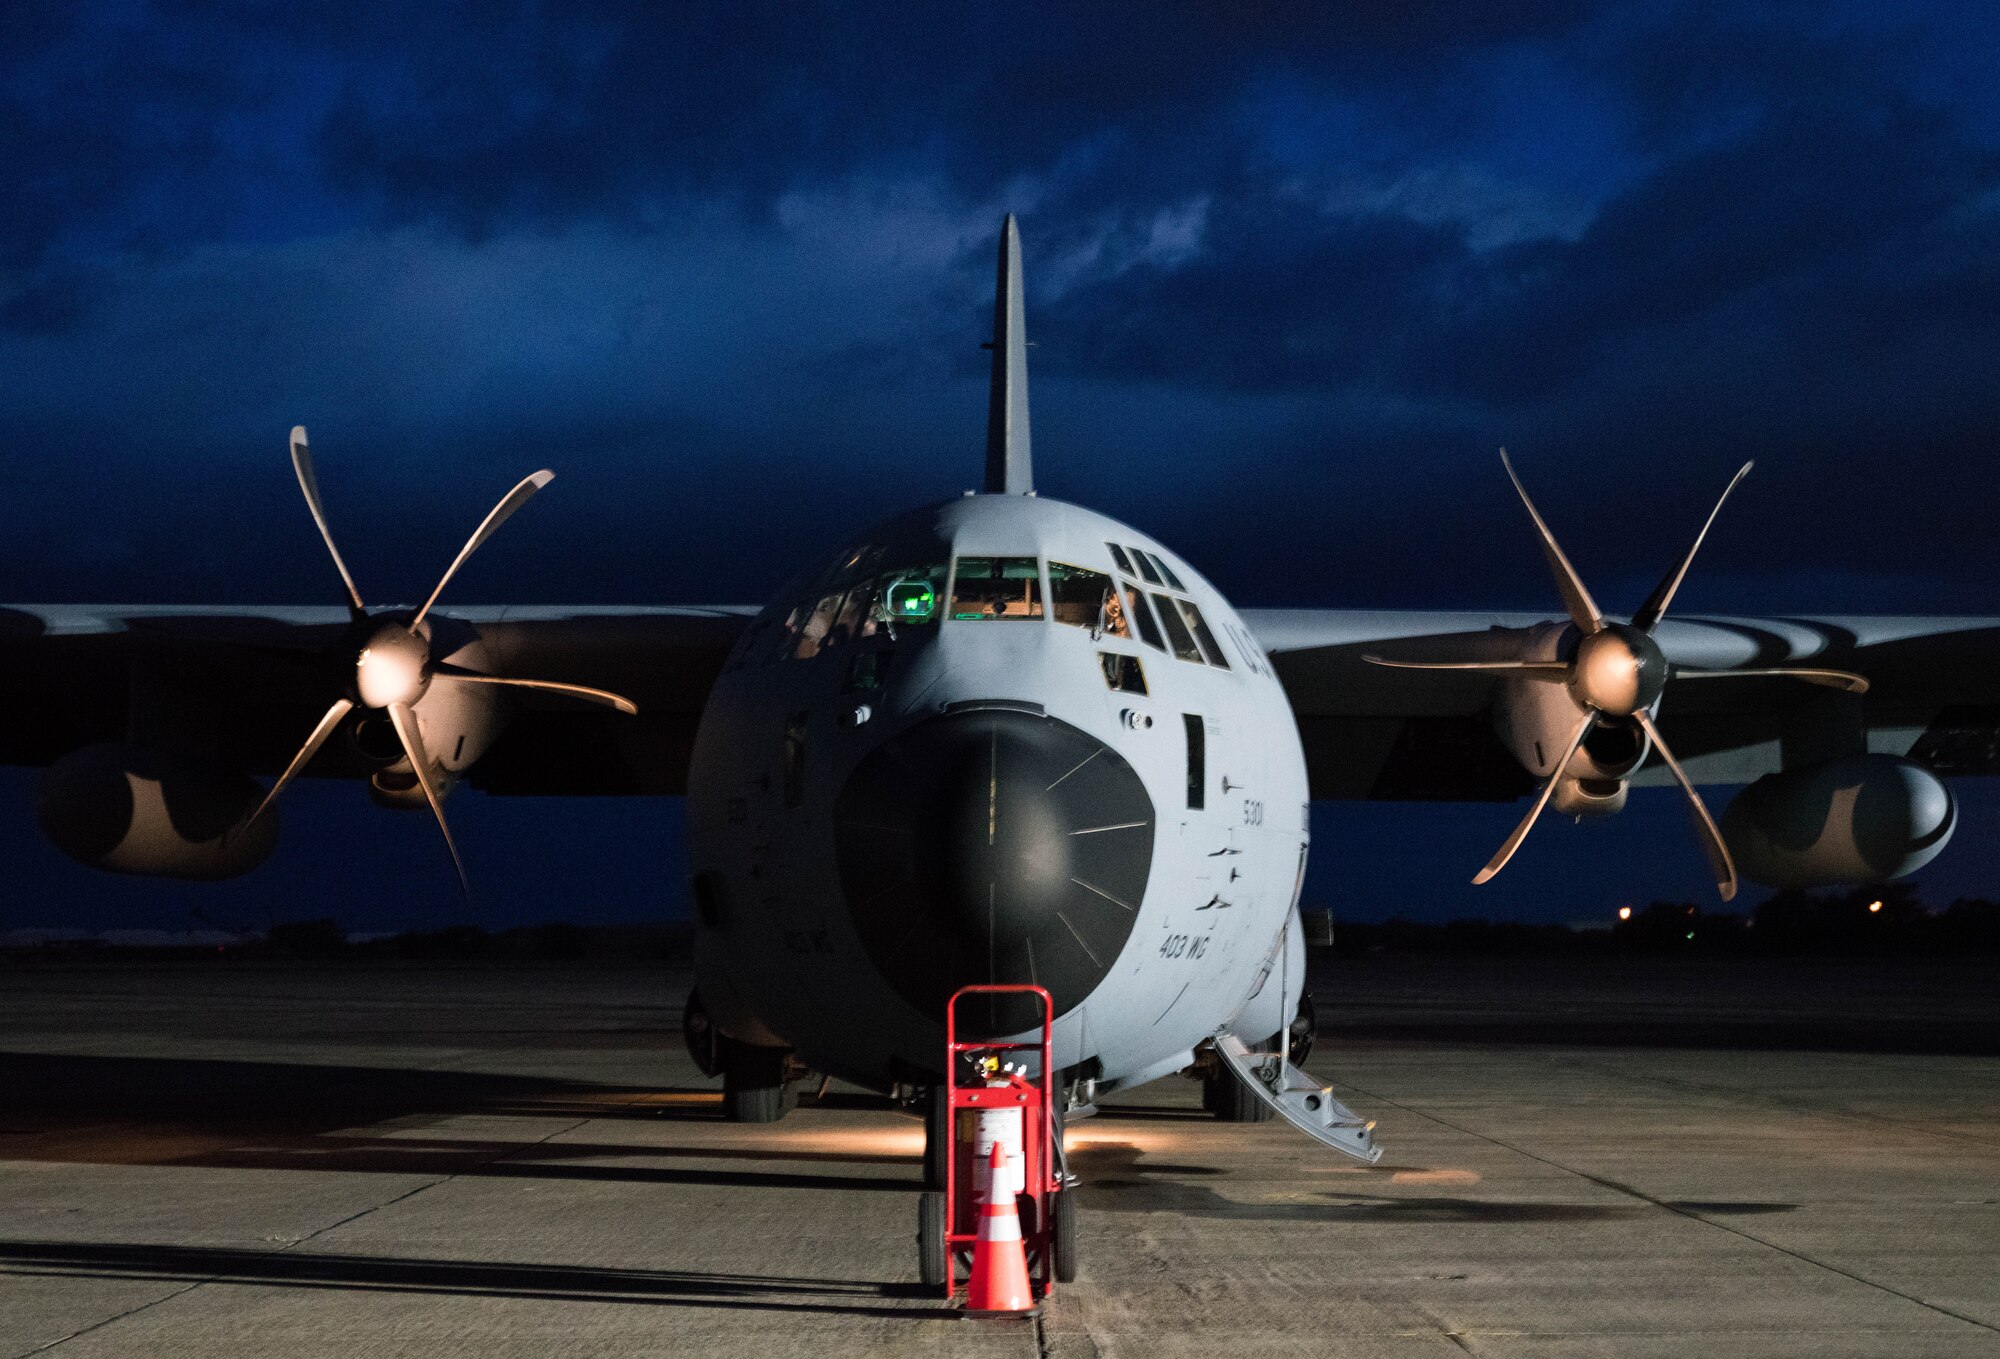 An Air Force Reserve Hurricane Hunter aircrew runs its flight checklists preparing to fly into Hurricane Douglas, the first hurricane in the Pacific this season, July 26, 2020, to collect weather data to assist the Central Pacific Hurricane Center with their forecasts. The 53rd Weather Reconnaissance Squadron, assigned to the 403rd Wing at Keesler Air Force Base, Mississippi, departed July 22 to conduct operations out of Barbers Point Kapolie Airport, Hawaii. (U.S. Air Force photo by Lt. Col. Marnee A.C. Losurdo)